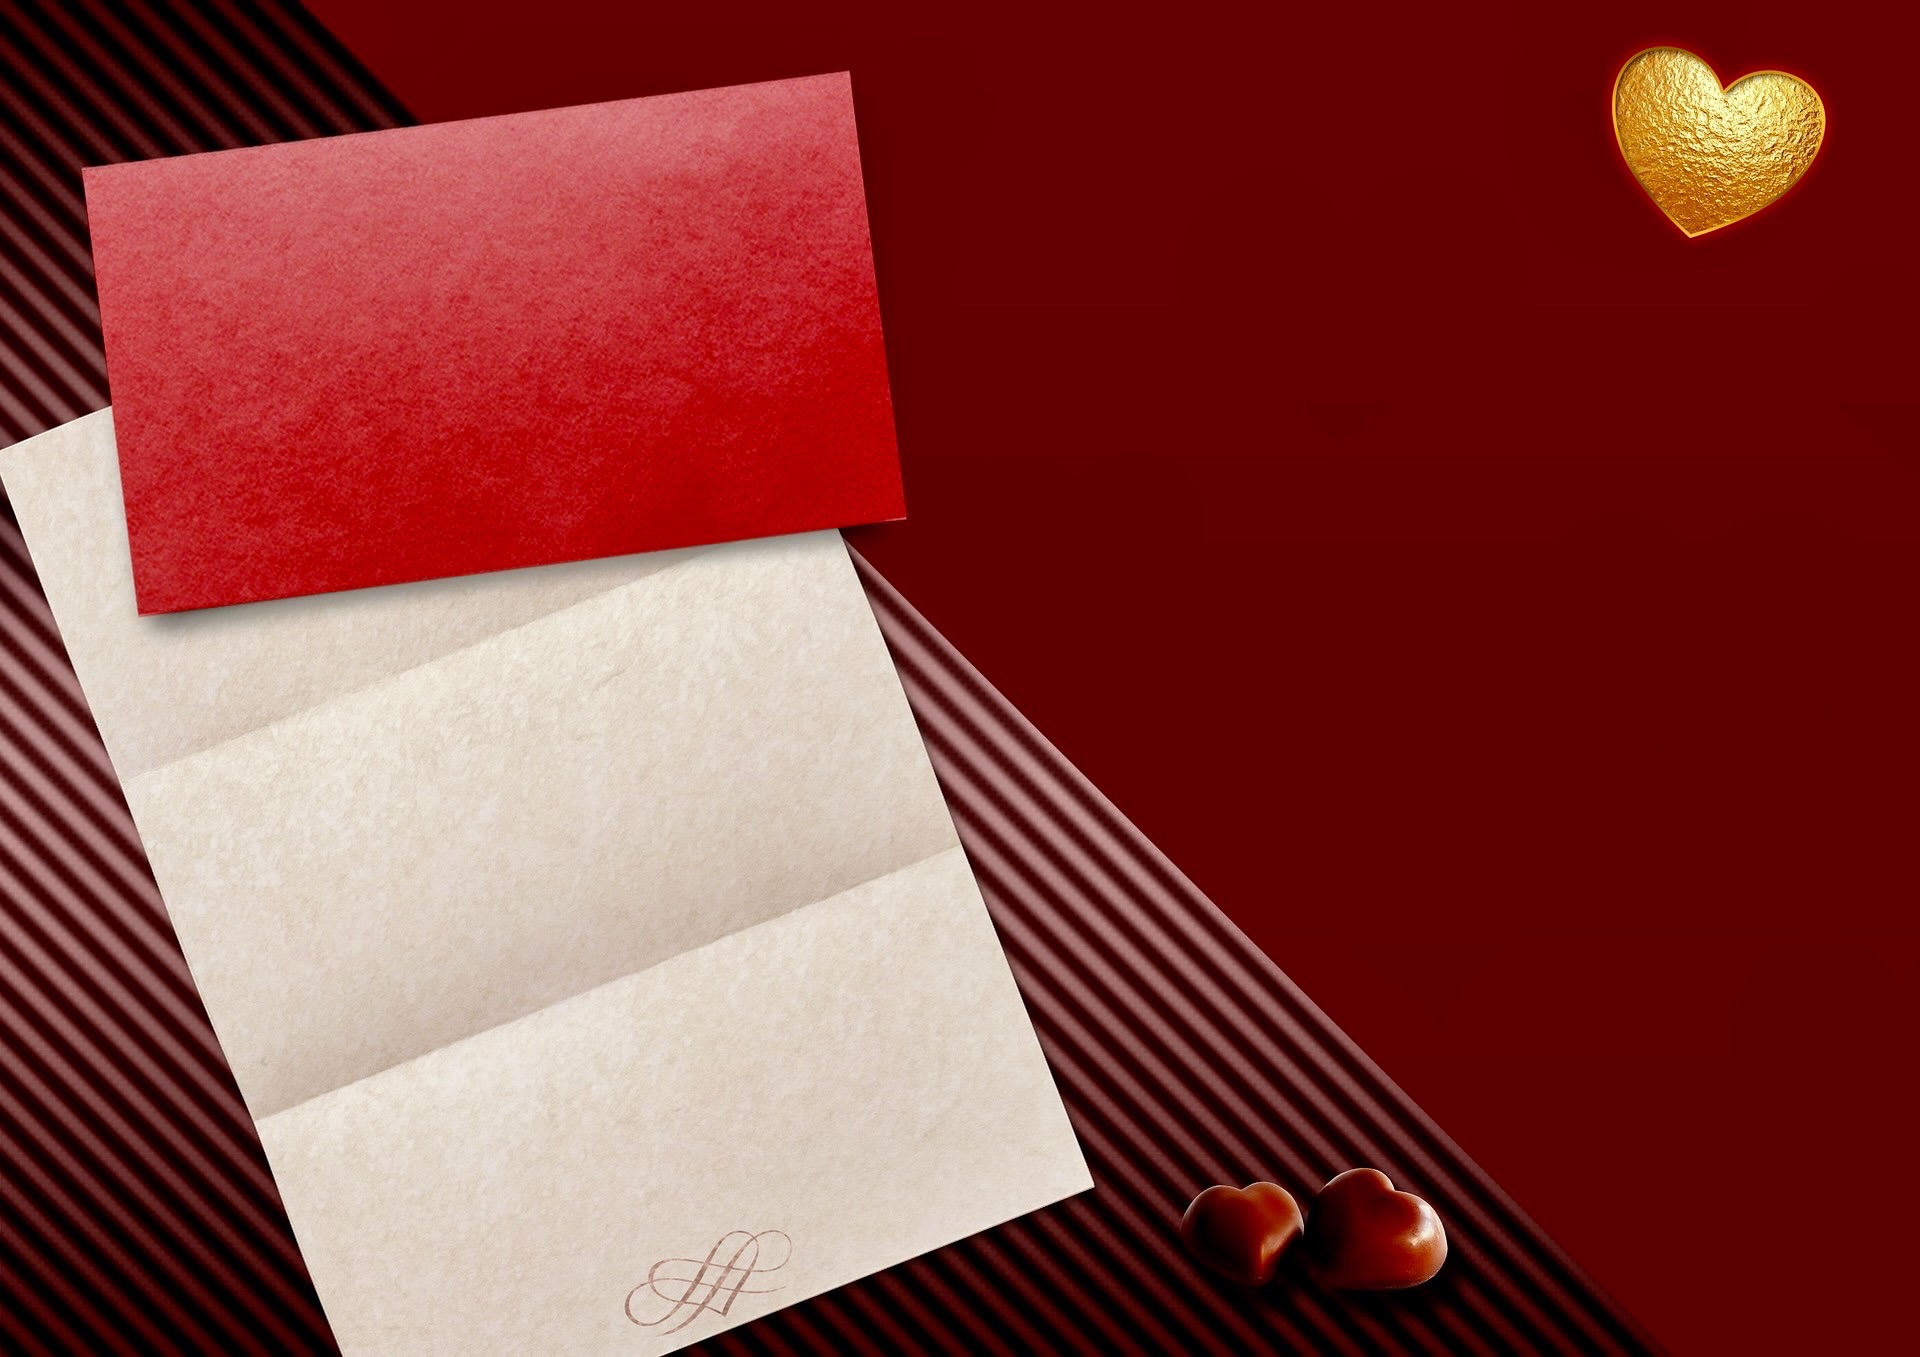 Red party invitation on a red background